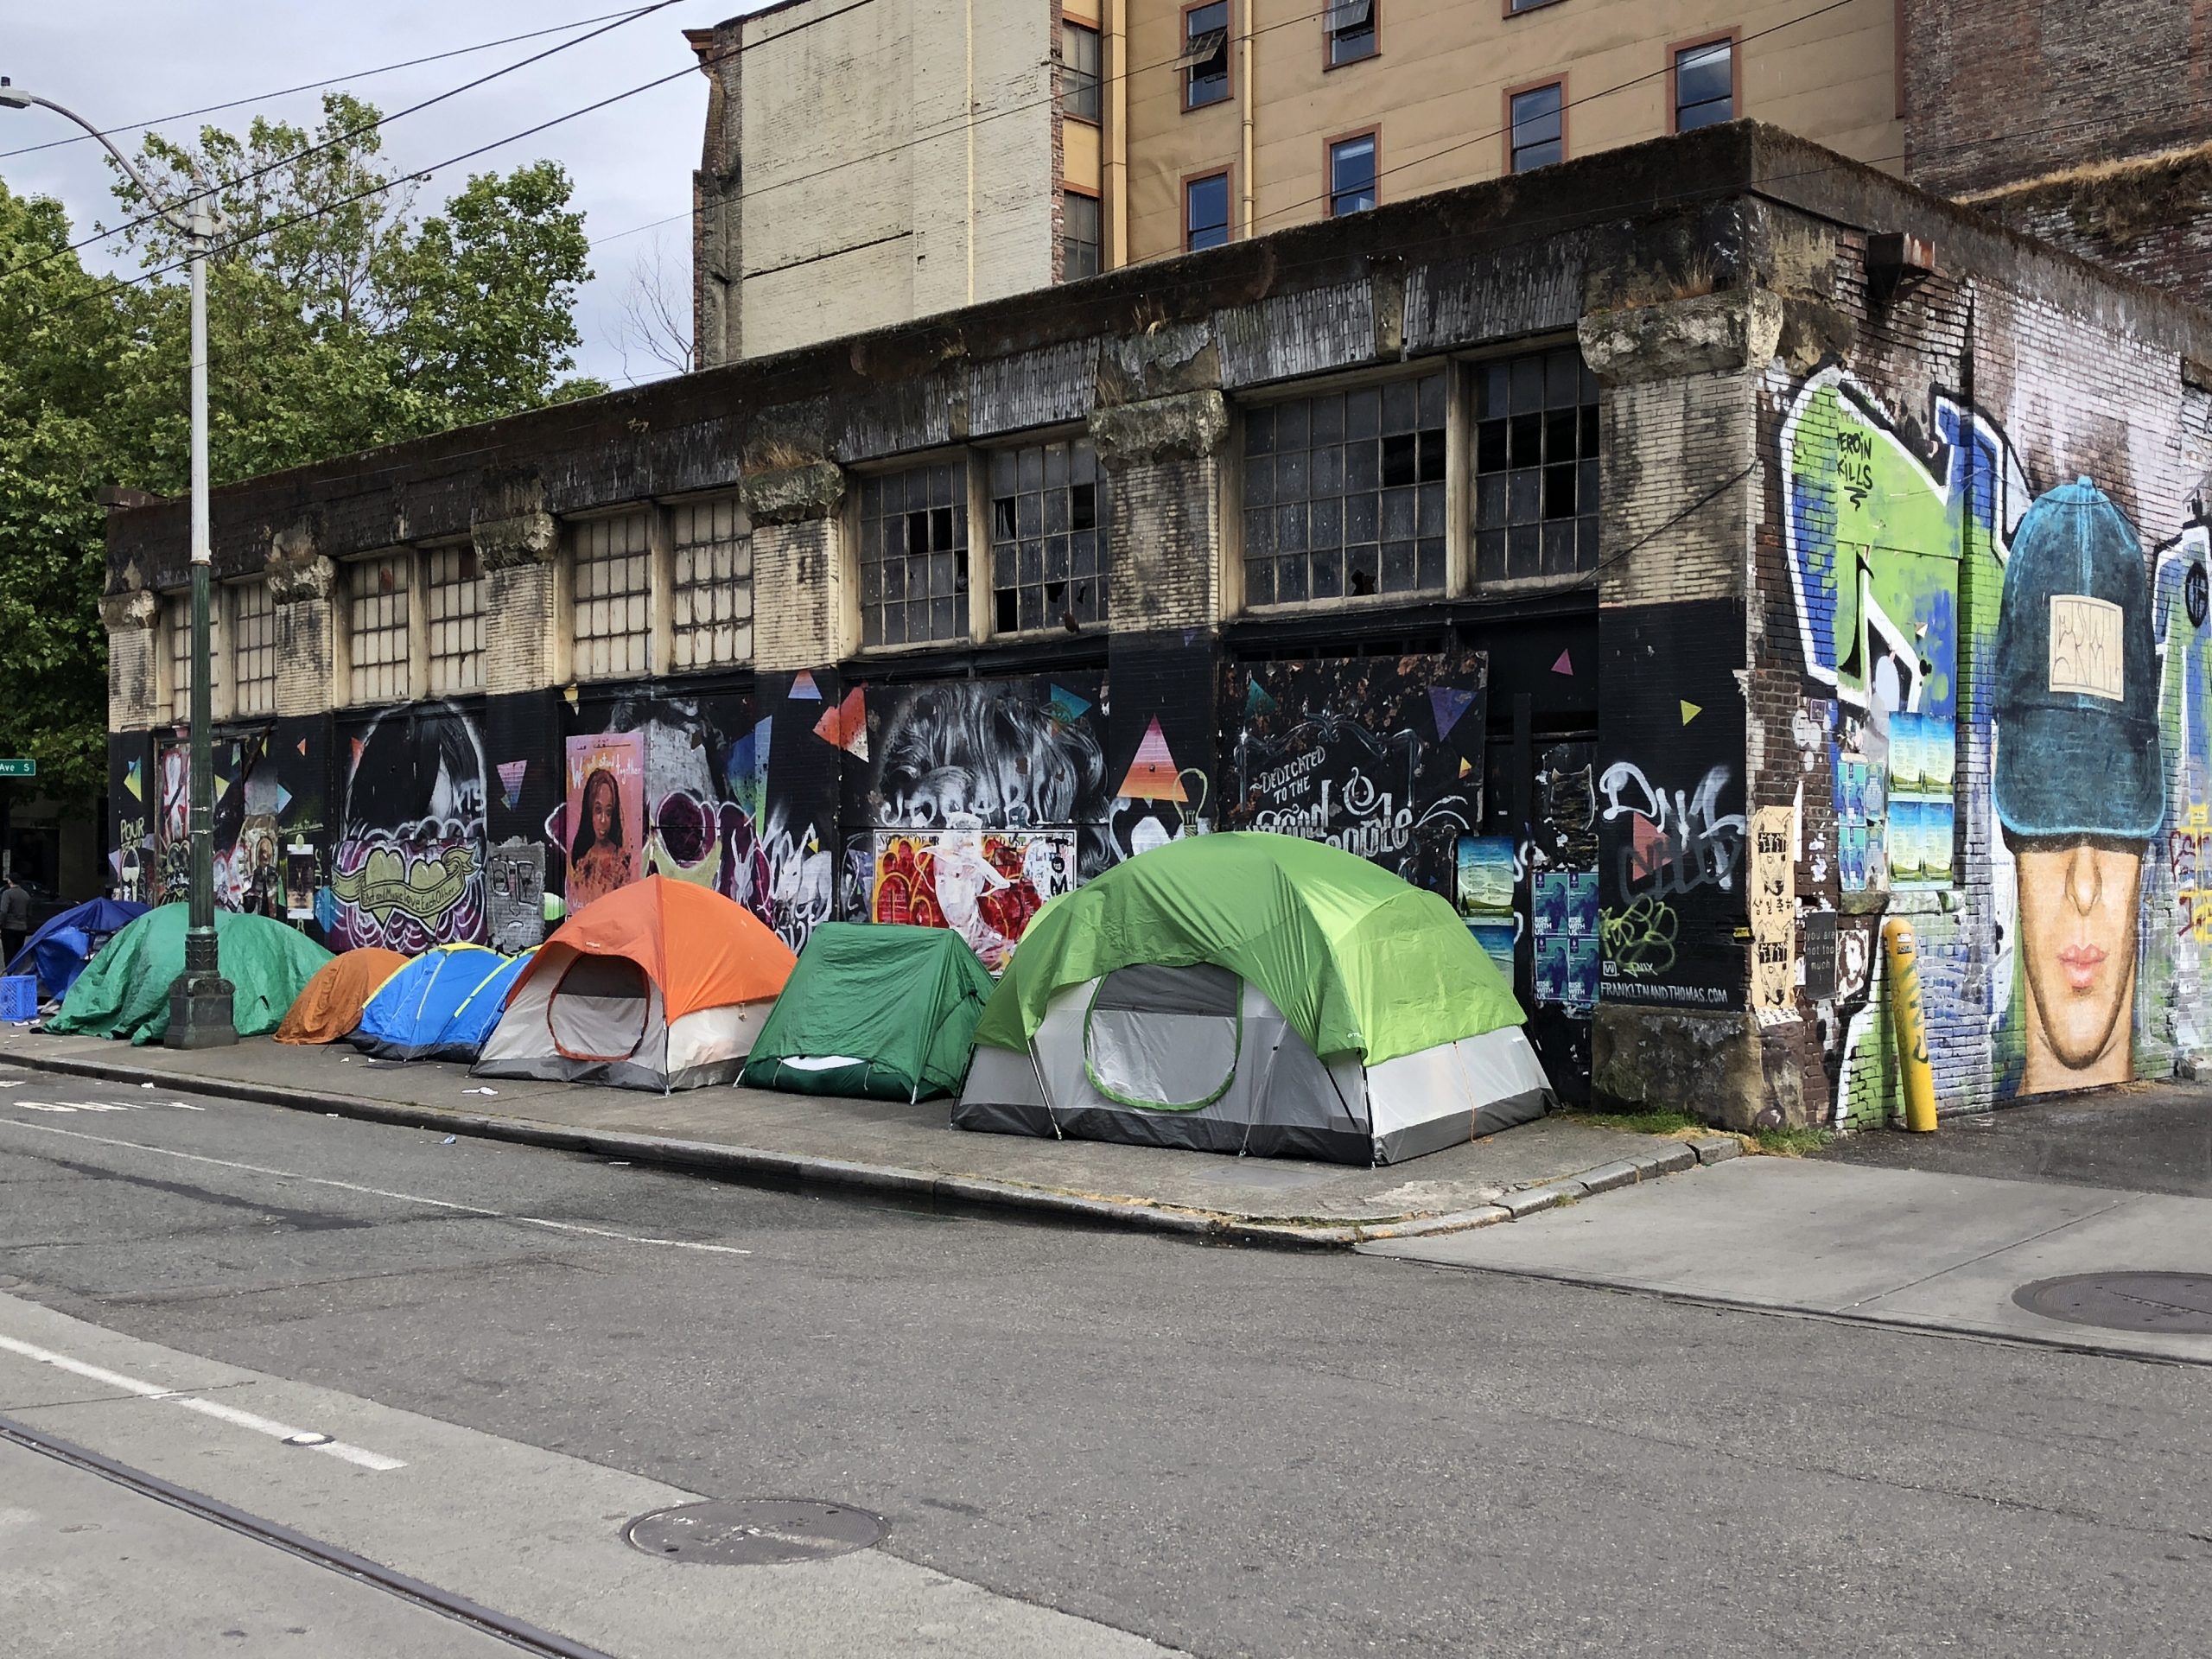 Initiative to curb homelessness crisis in Seattle likely to qualify for November ballot